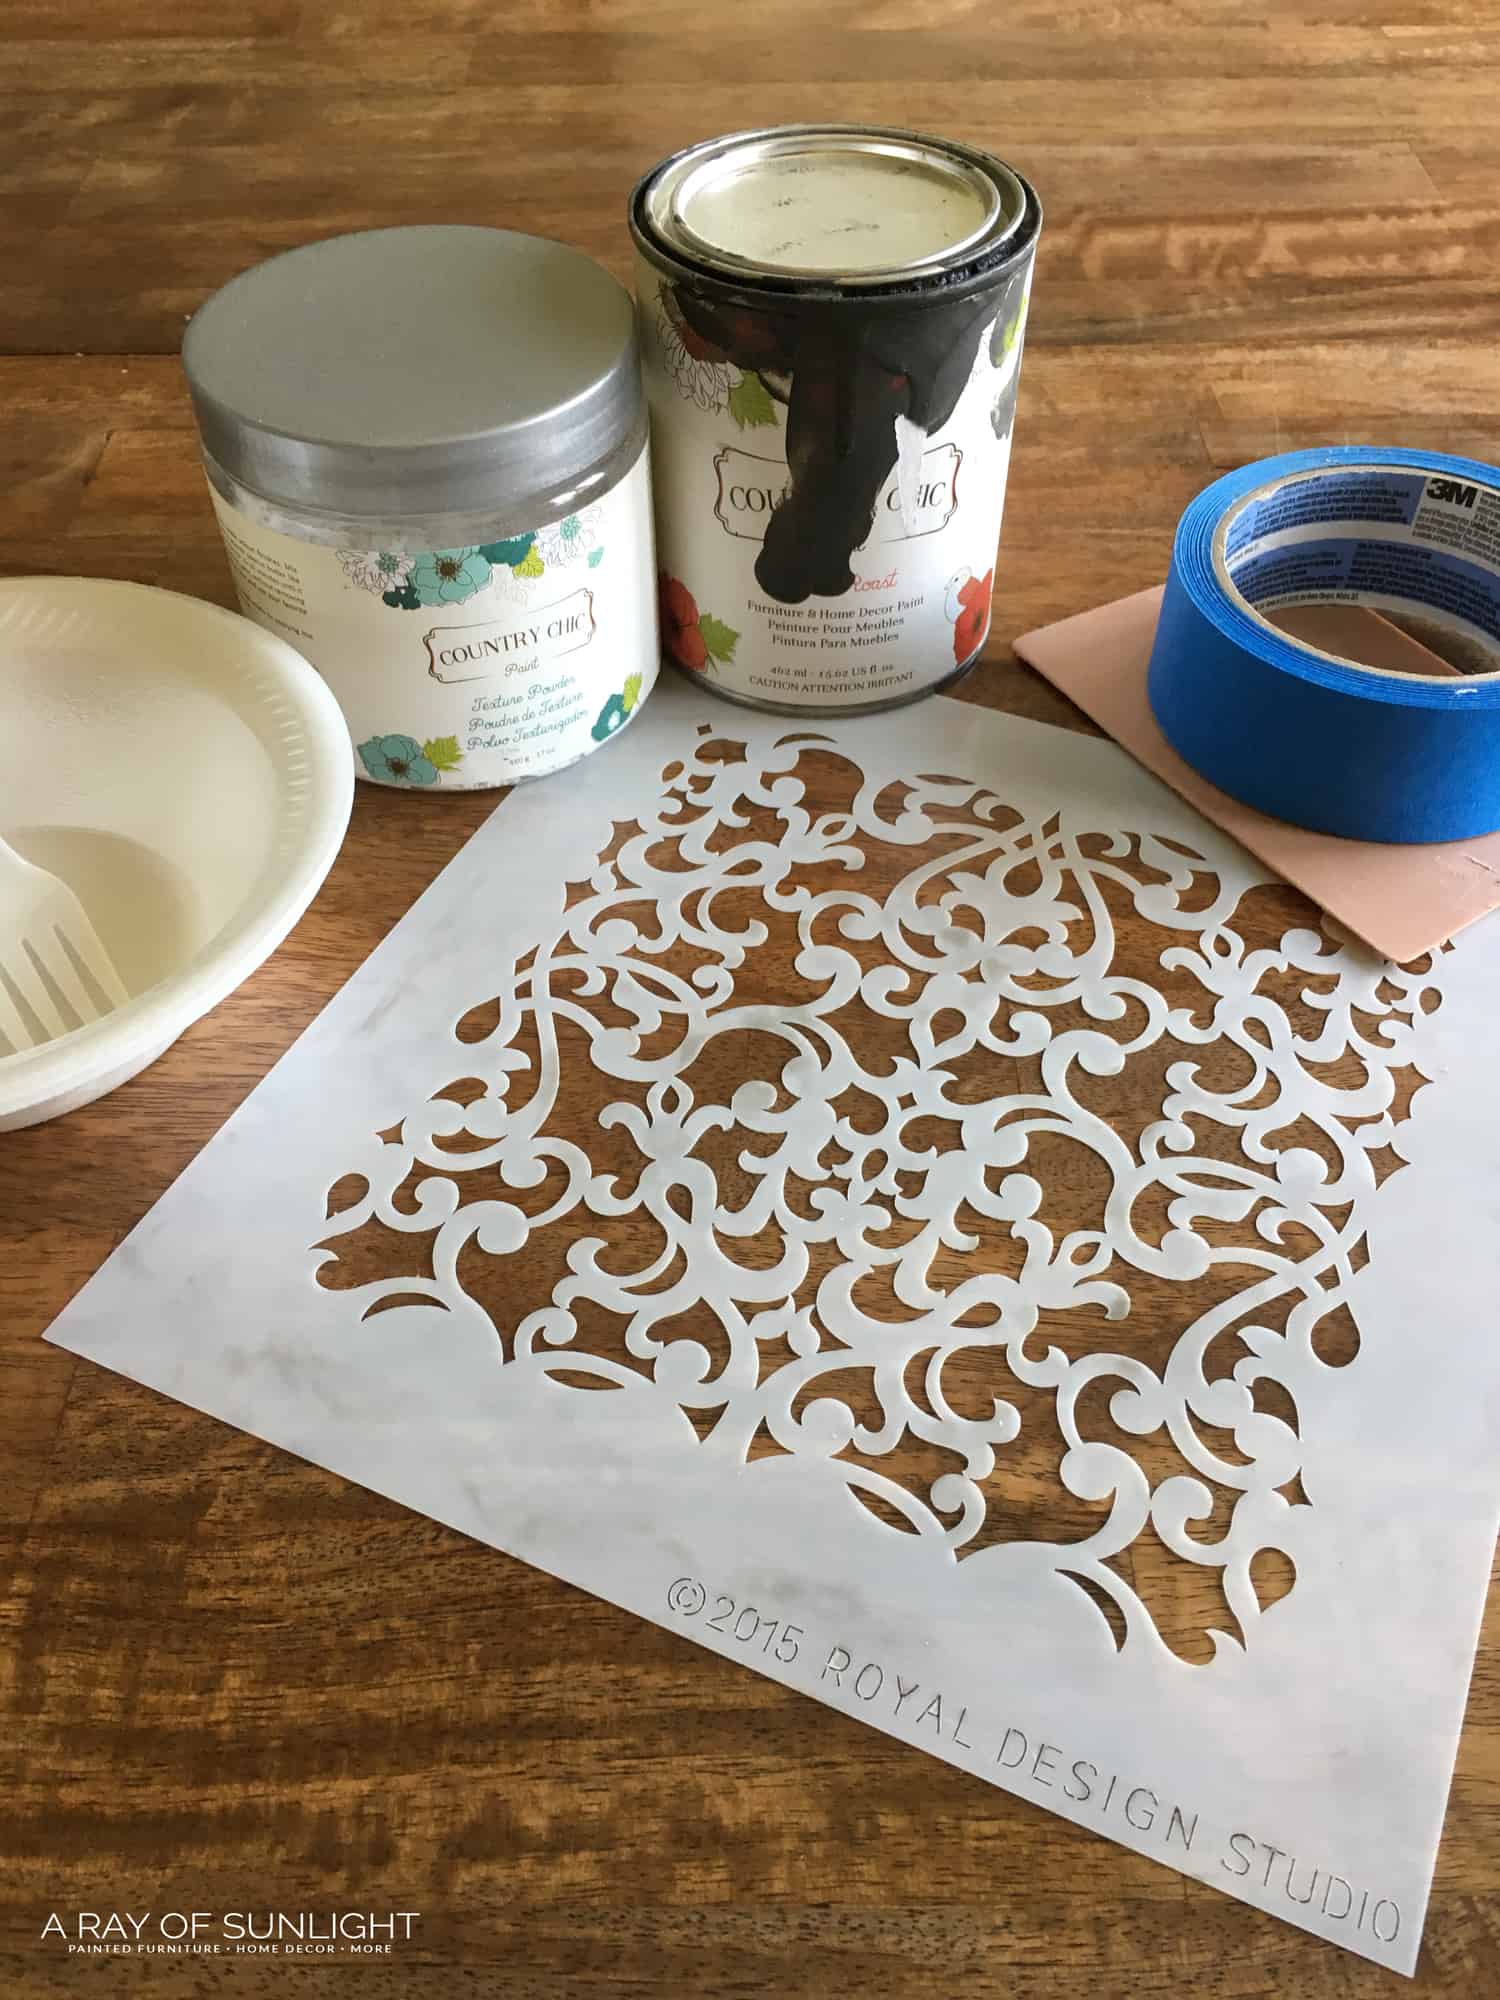 Supplies for creating raised stencil on furniture